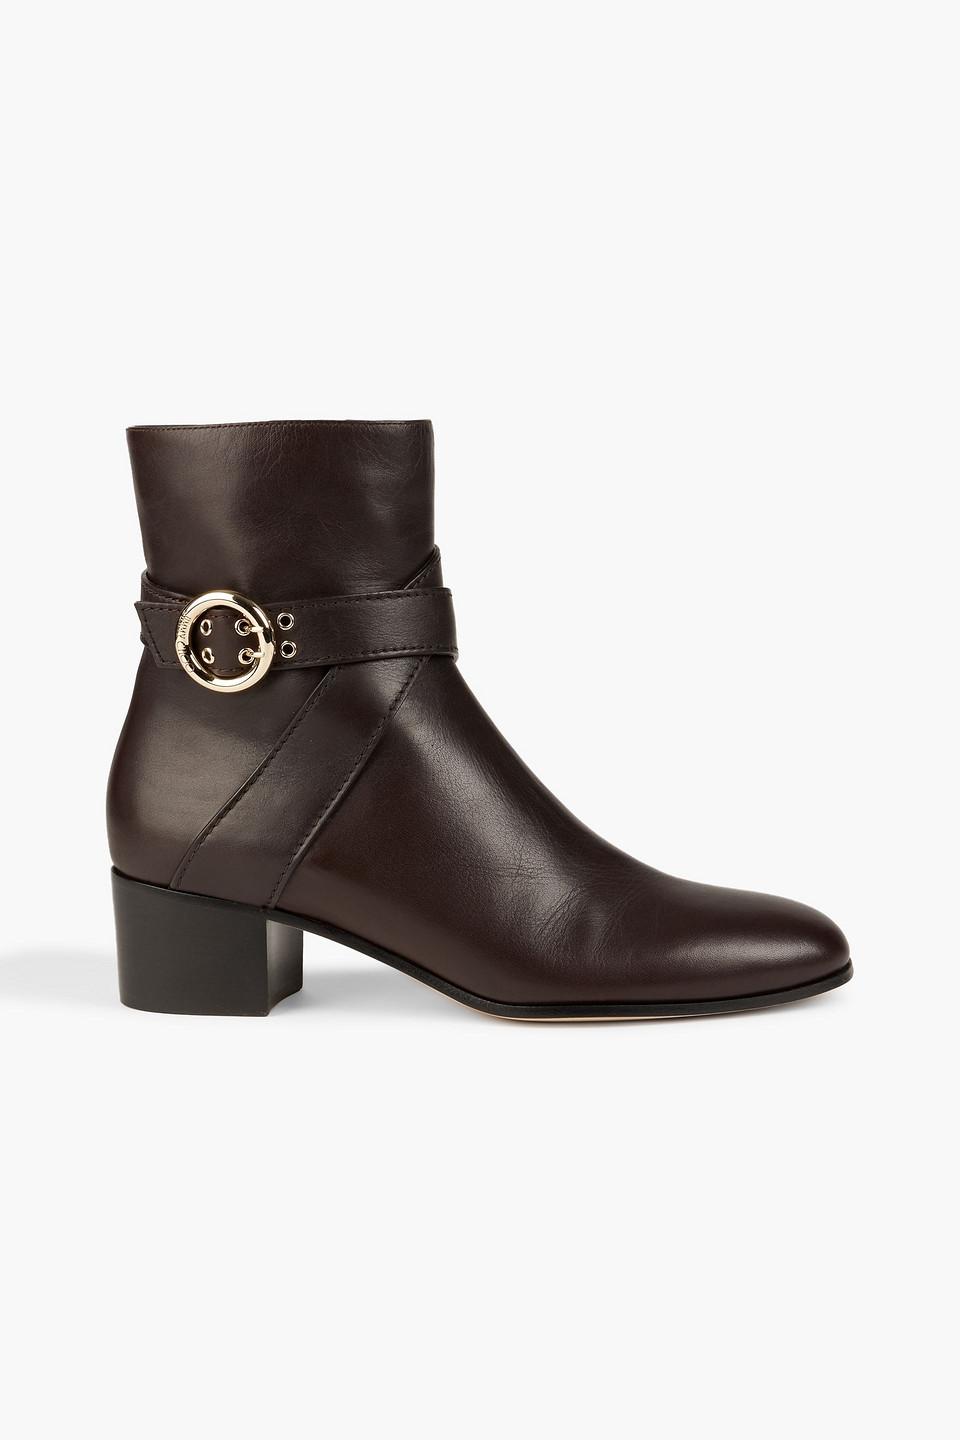 Jimmy Choo Blanka 40 Buckled Leather Ankle Boots in Brown | Lyst